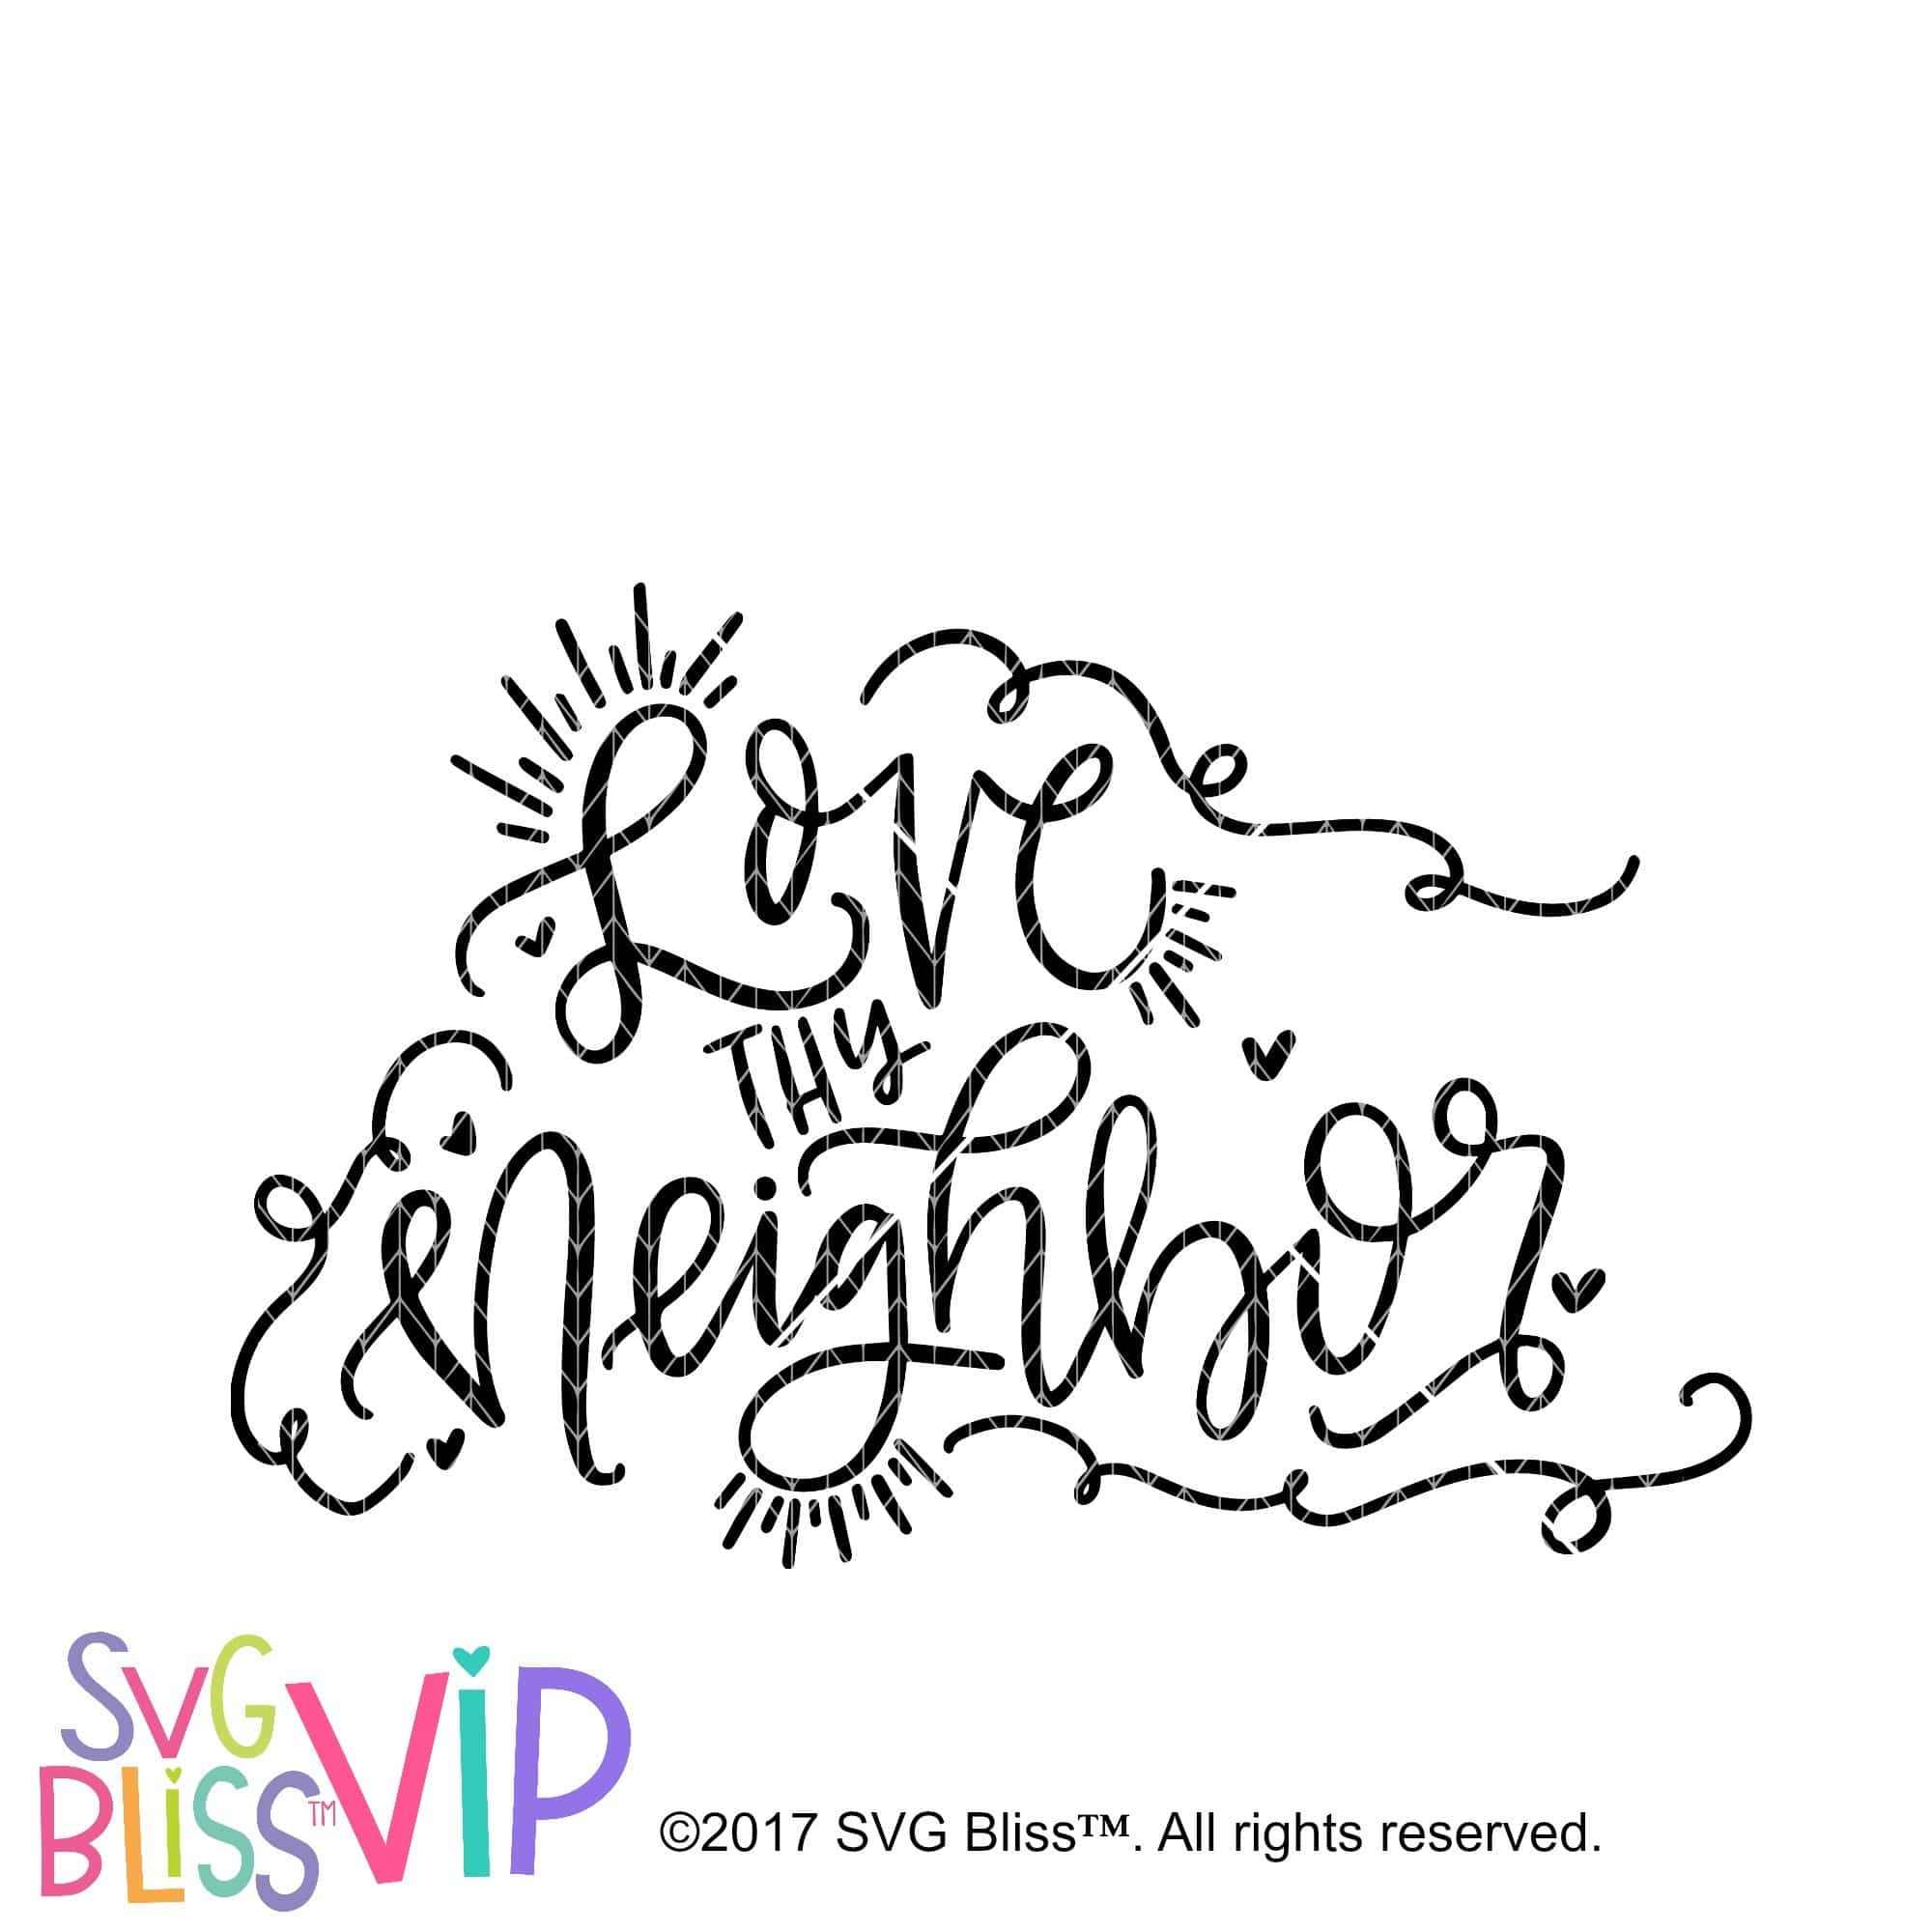 Download Svg Bliss Love Thy Neighbor Svg Eps Dxf Cutting File